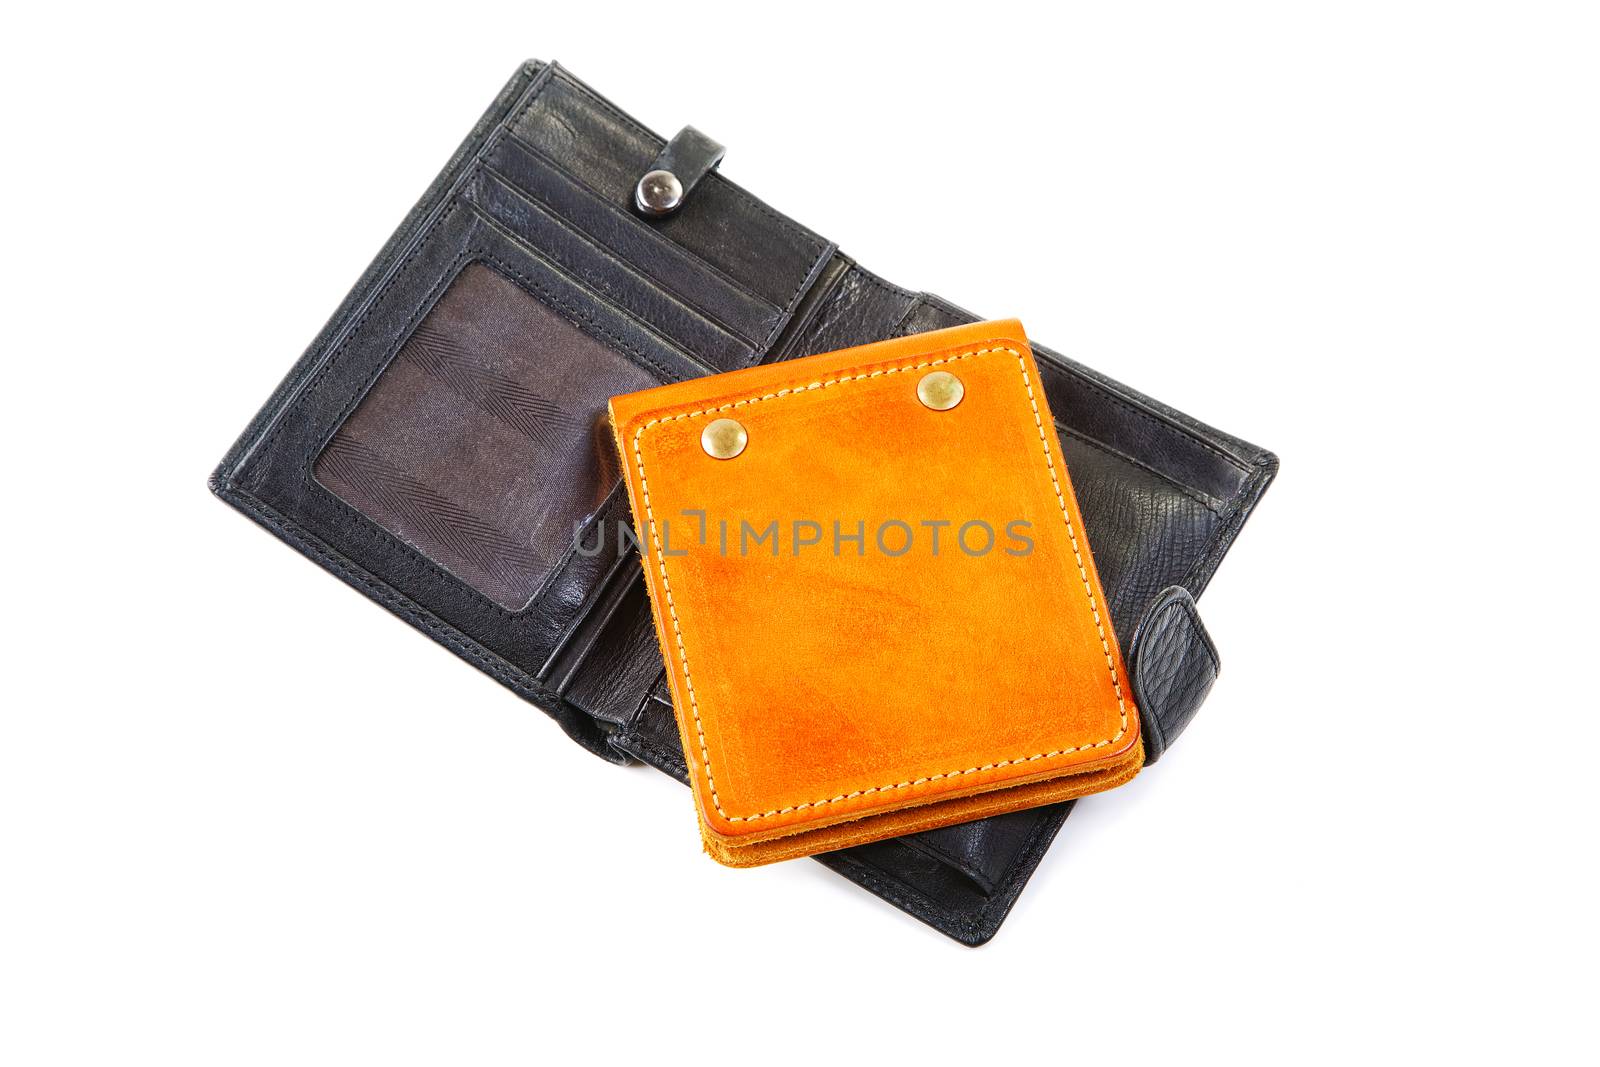 Leather purse and organizer isolated on a white background